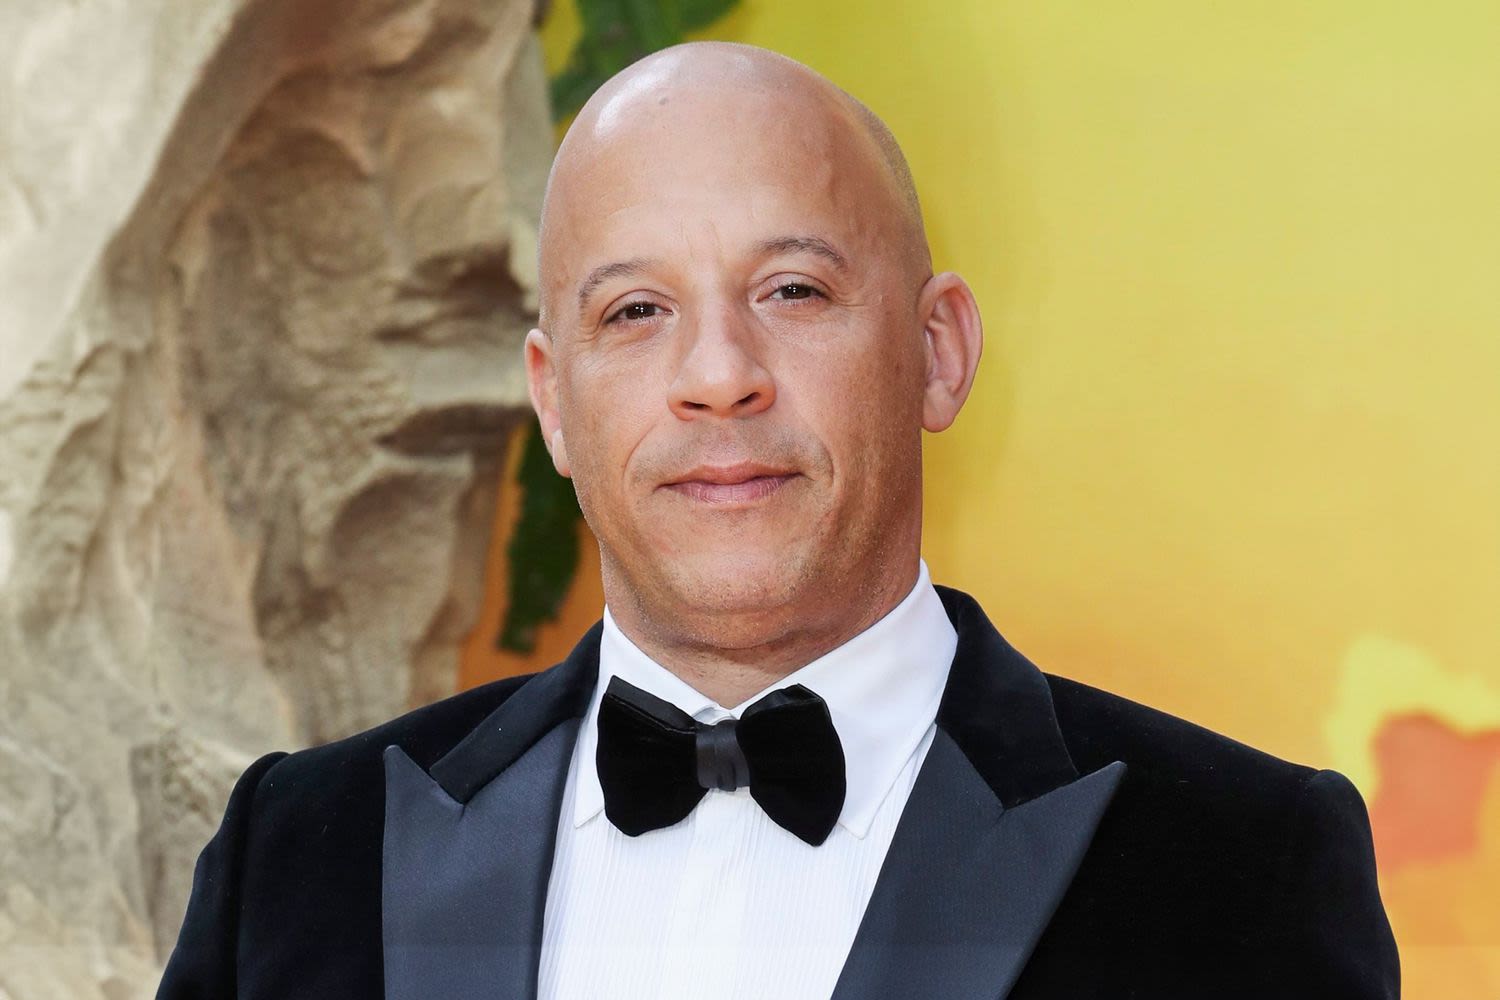 Vin Diesel crashes German wedding to the delight of bride and groom: 'Simply a fever dream'